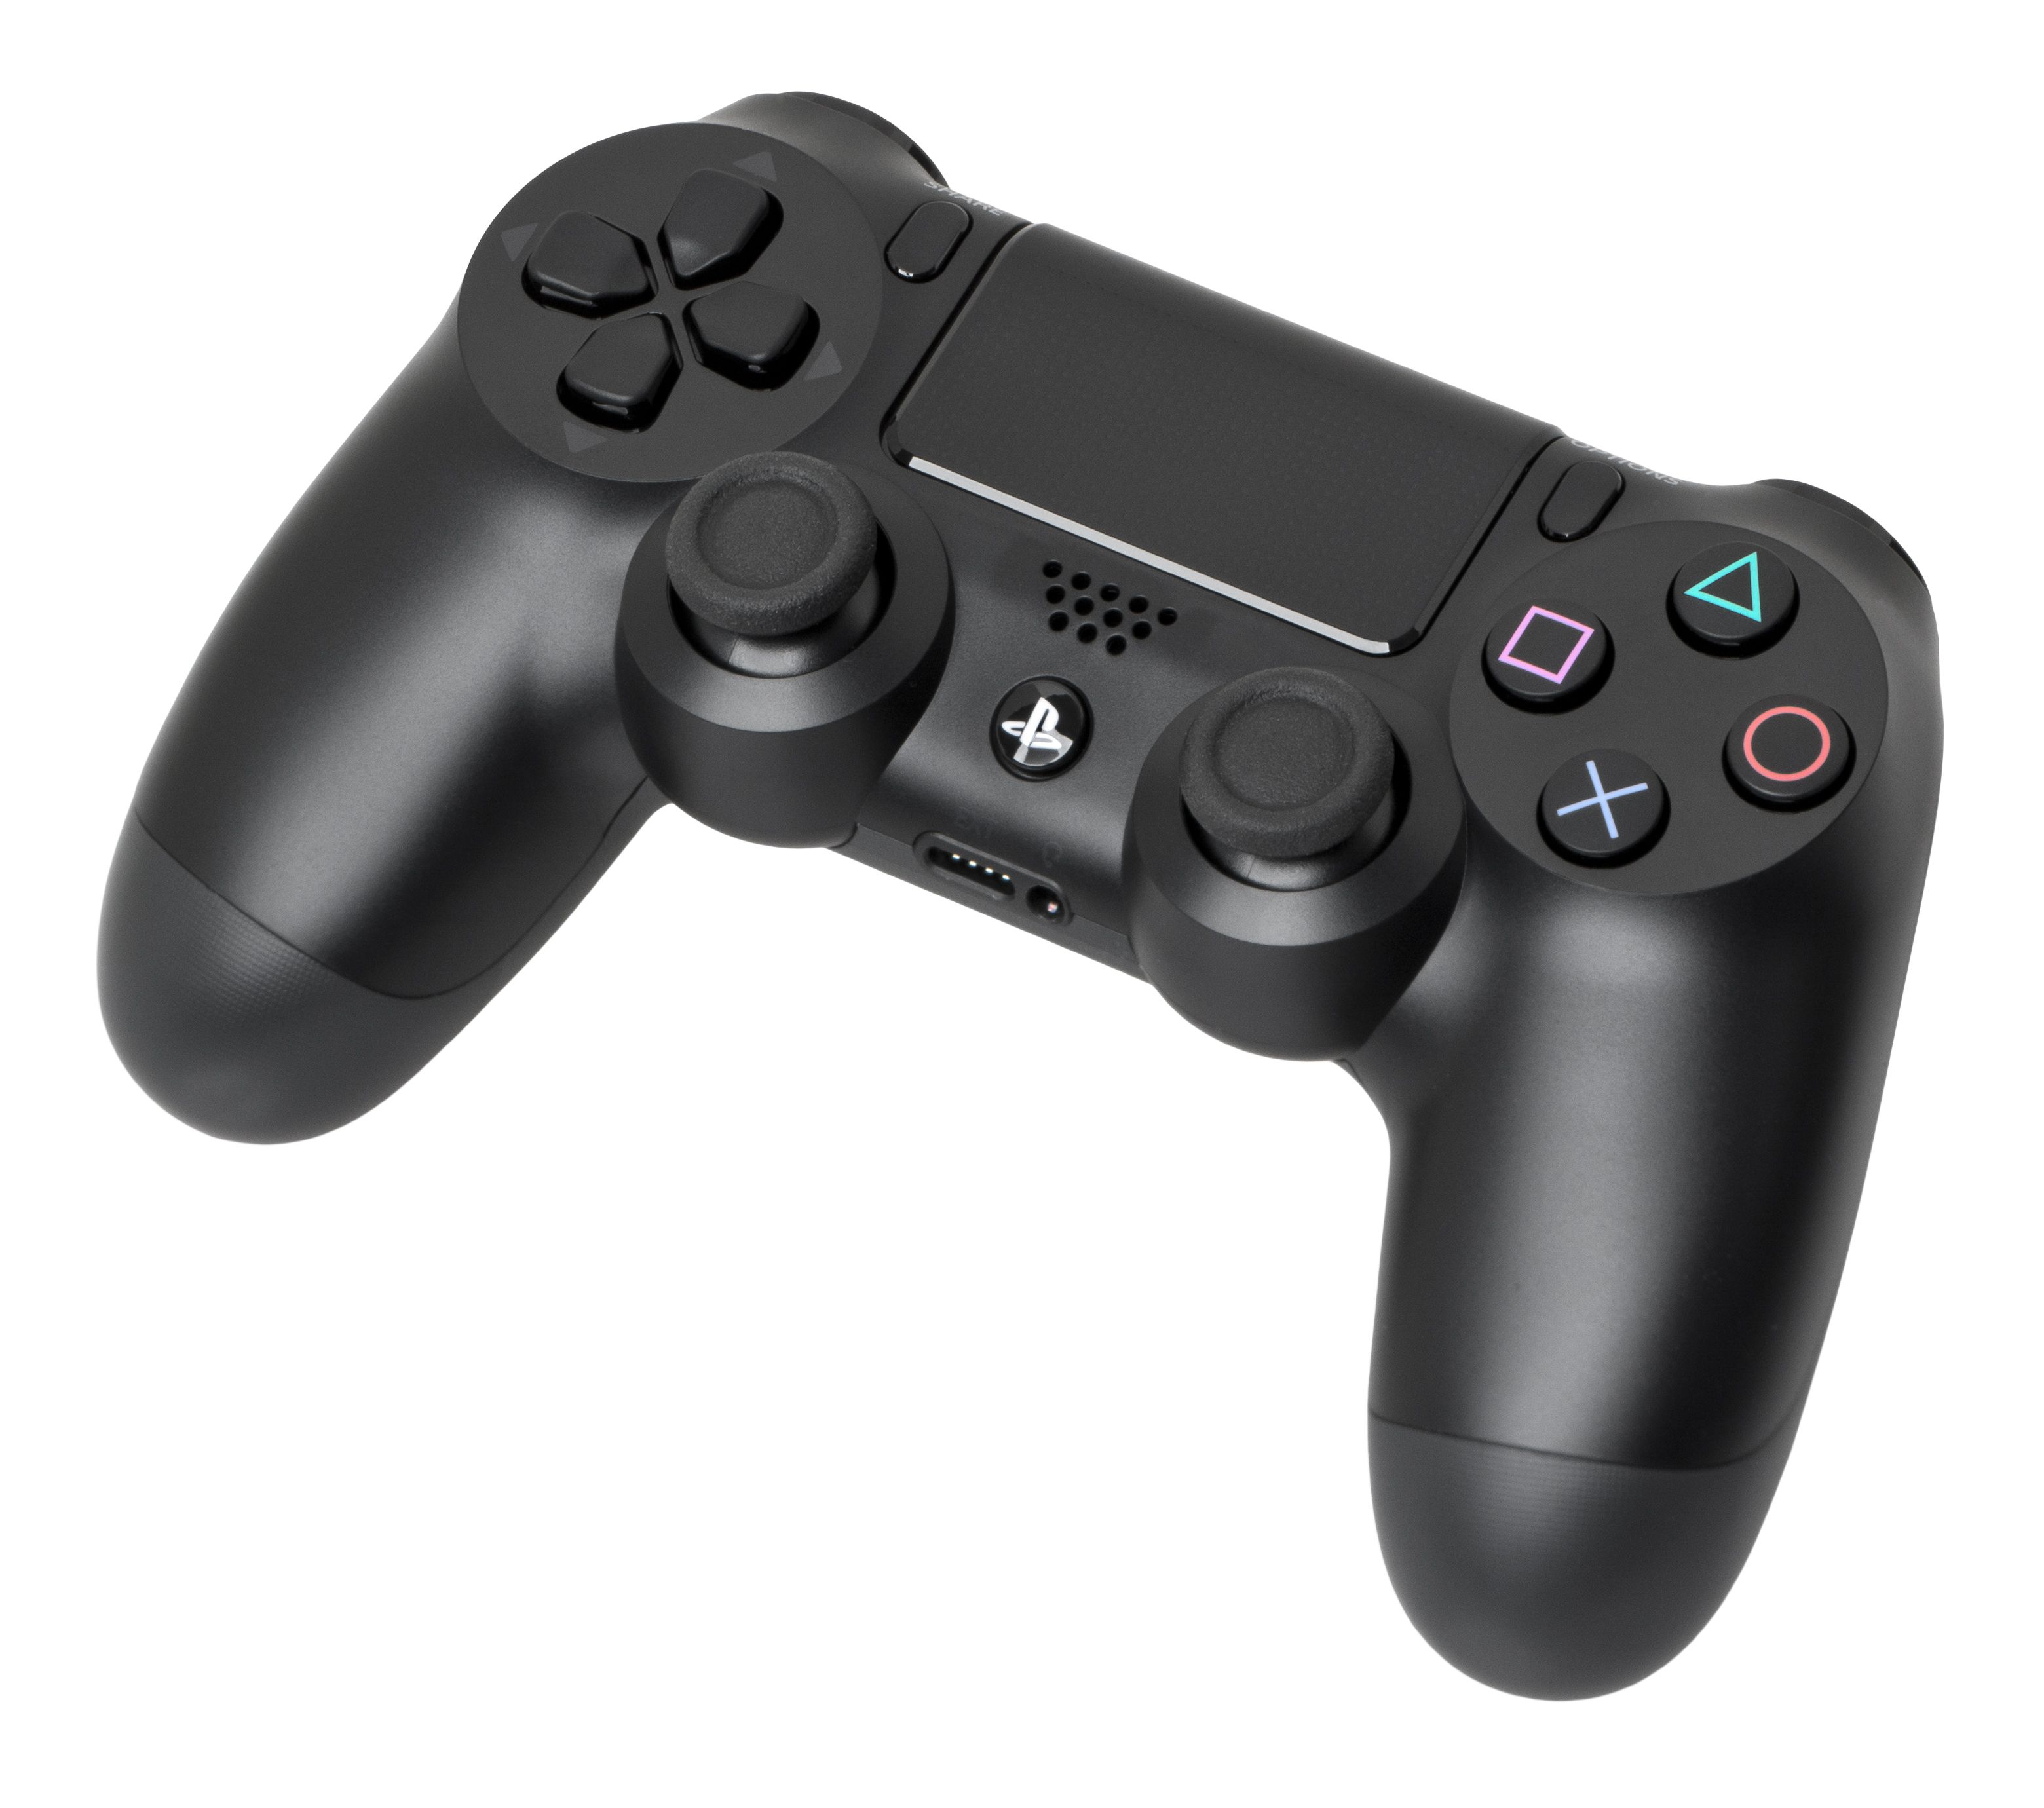 Patent suggests PS4 controller is the works